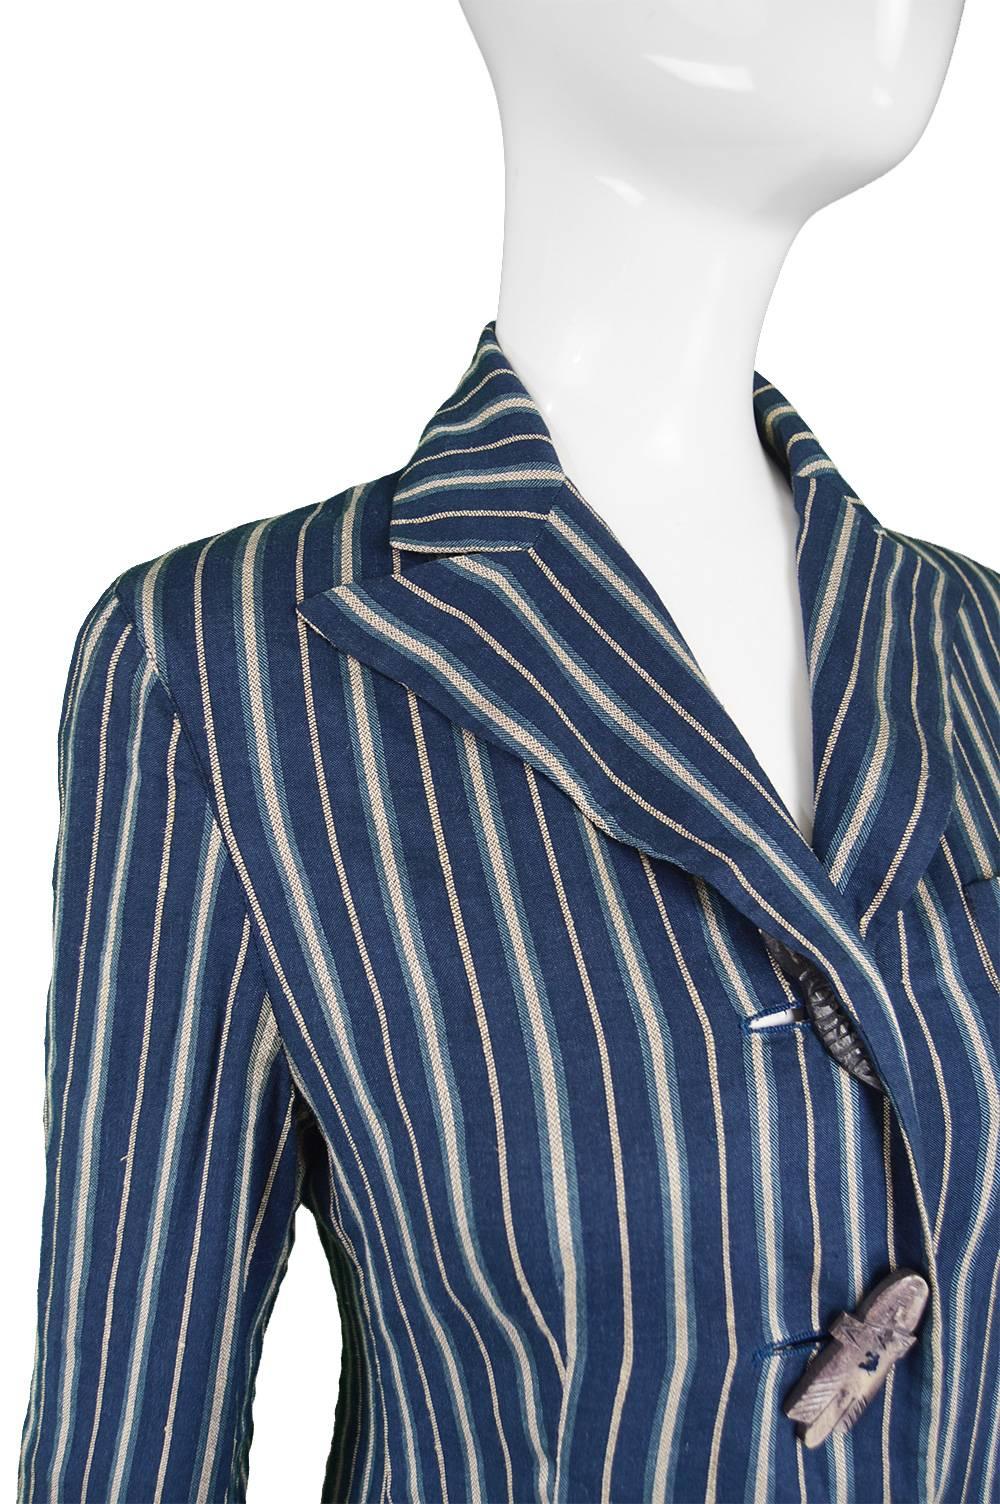 Romeo Gigli Vintage African Tribal Mask Buttoned Striped Linen Jacket, S/S 1995 1